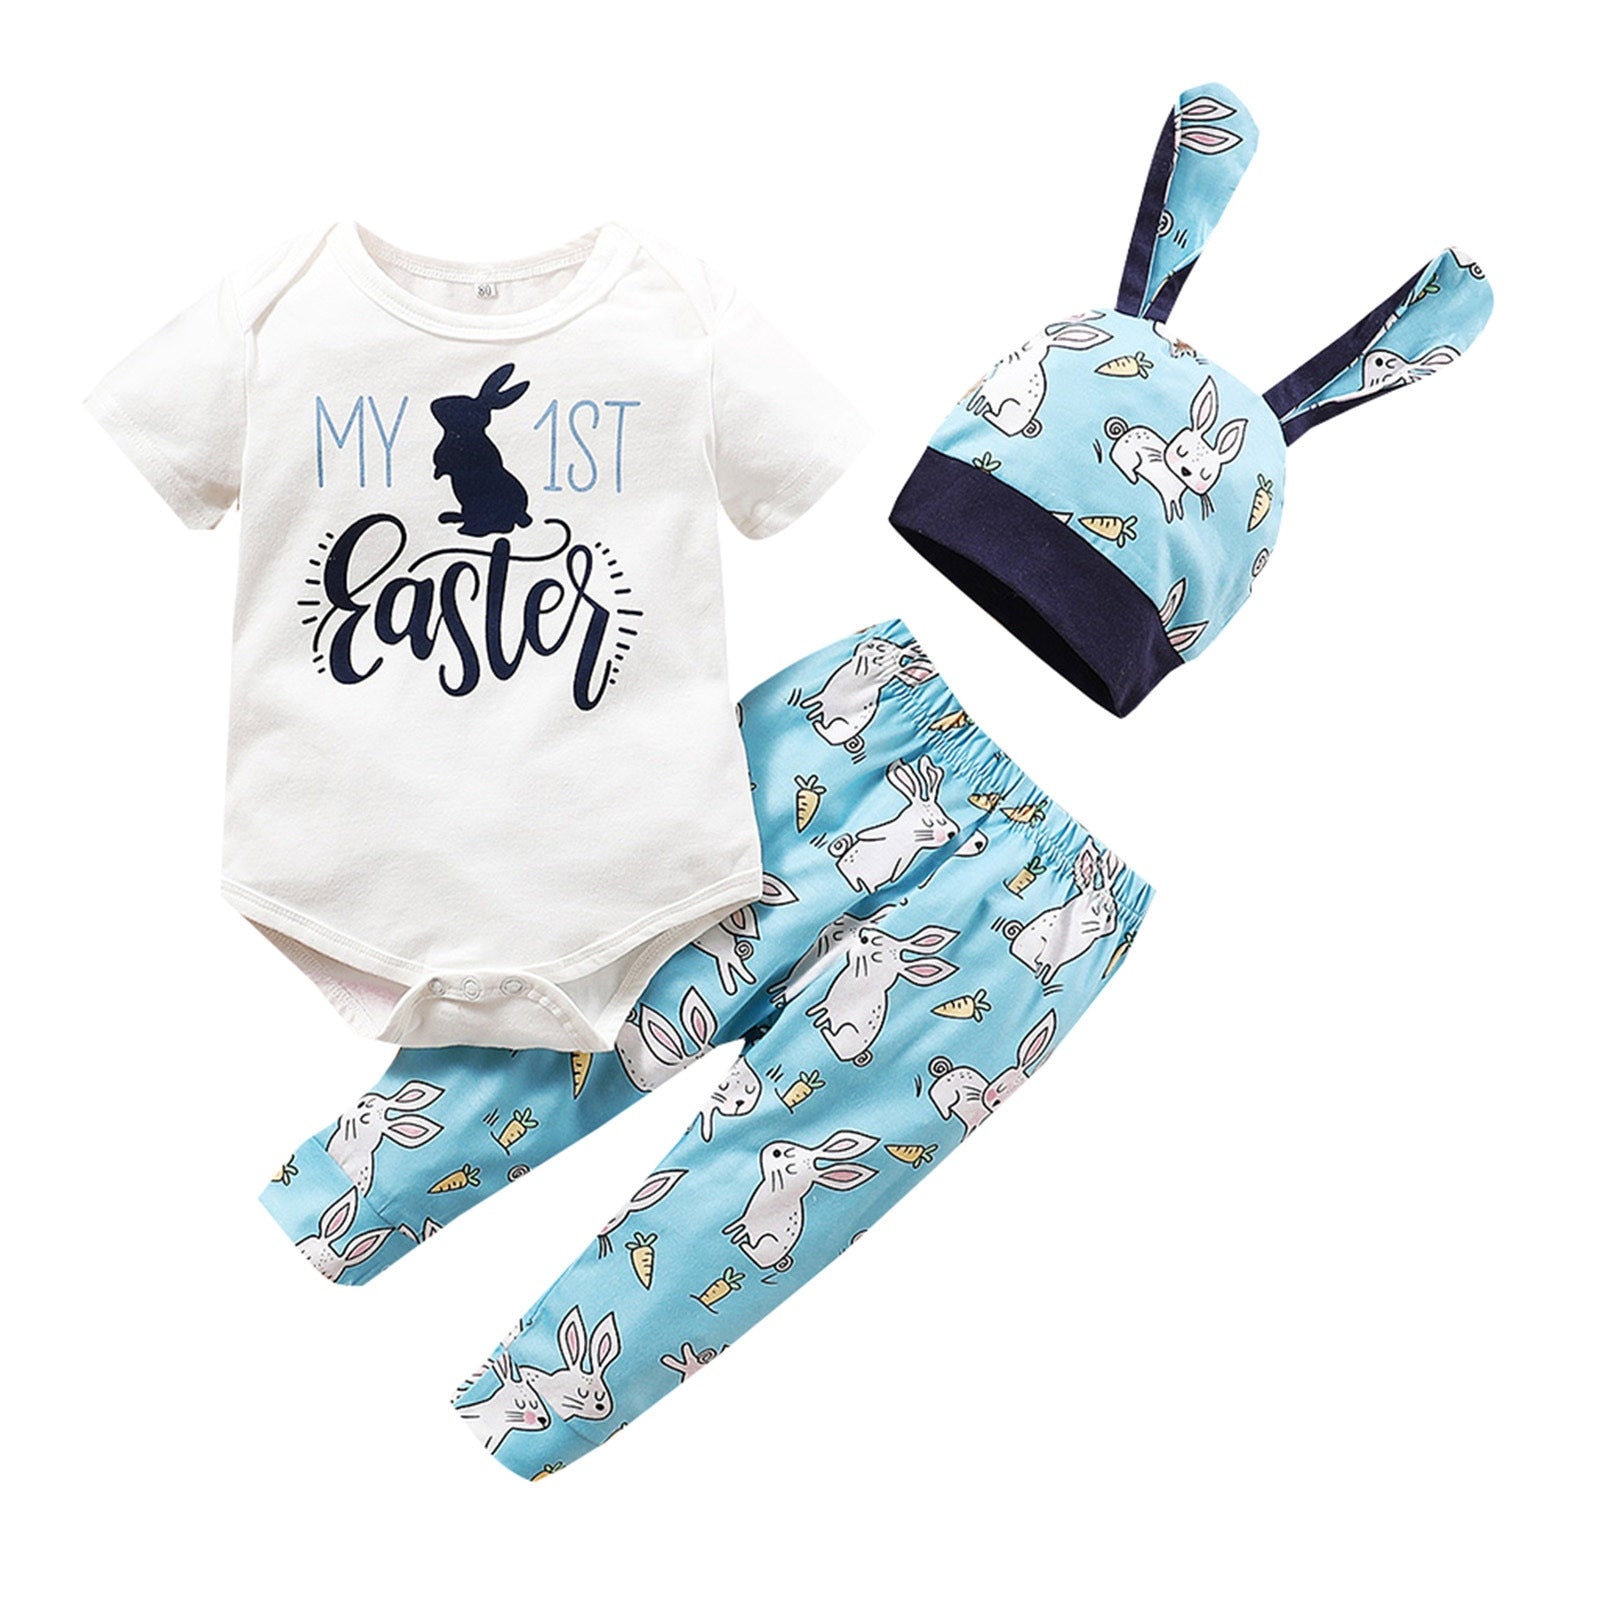 Adorable 3pcs Baby Boys and Girls Clothes Sets with Cute Cartoon Rabbit Prints